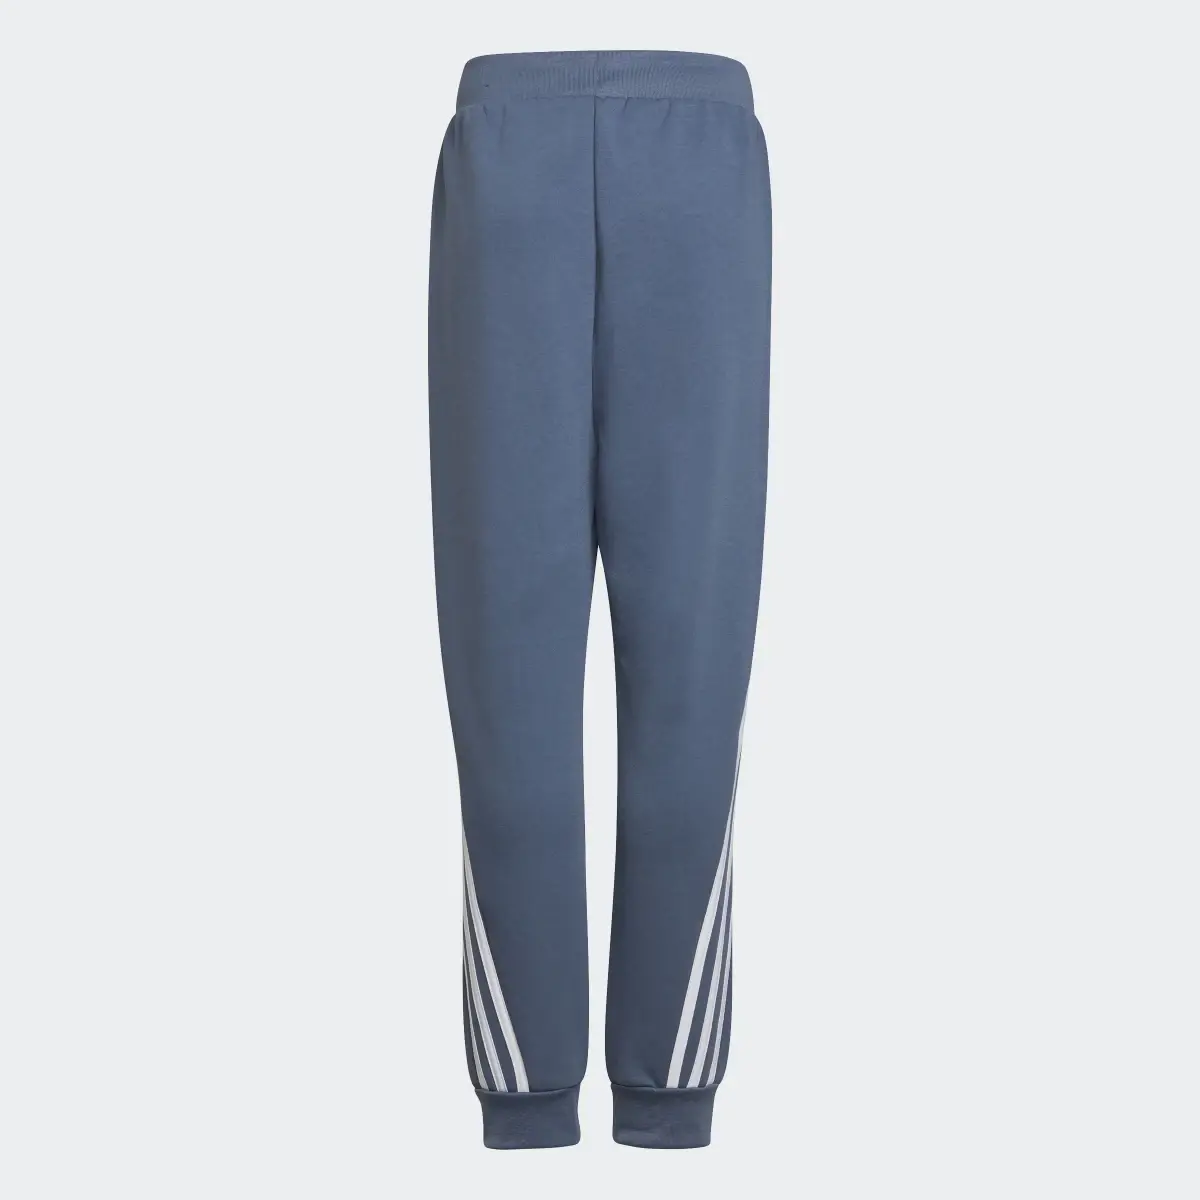 Adidas Future Icons 3-Stripes Tapered-Leg Tracksuit Bottoms. 2